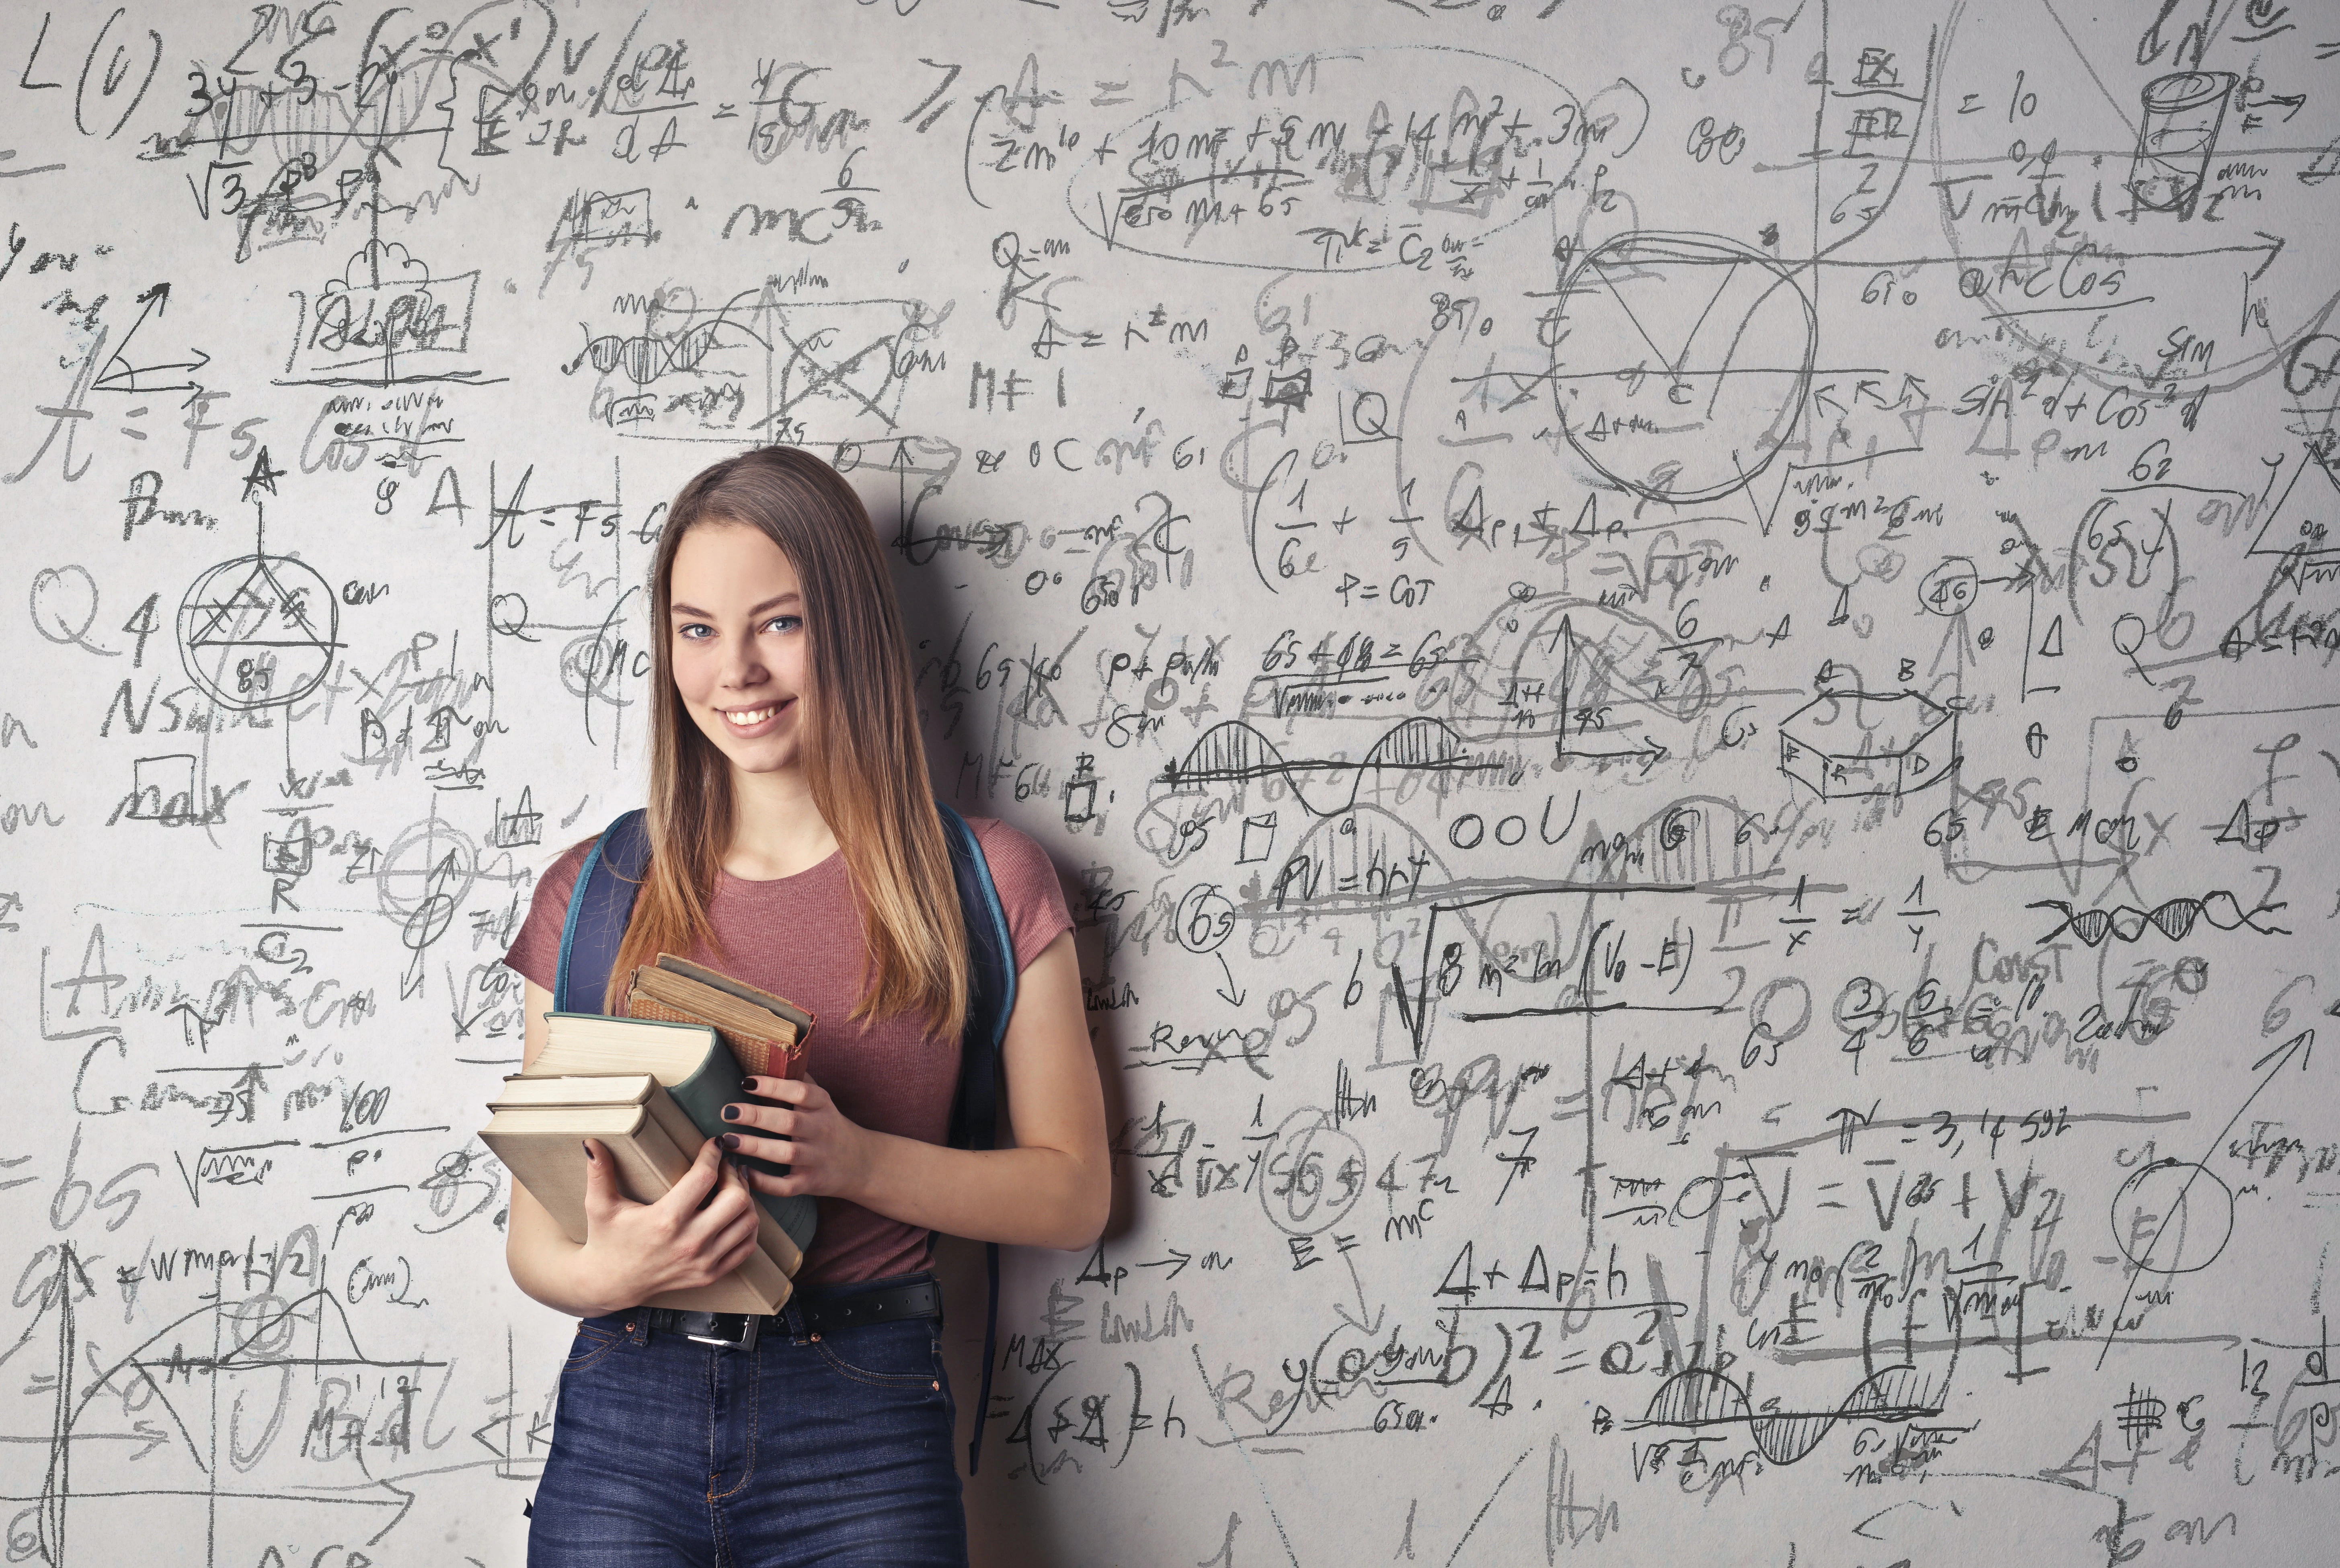 A college student with brown hair, holding a stack of books, standing in front of a white board with math written on it